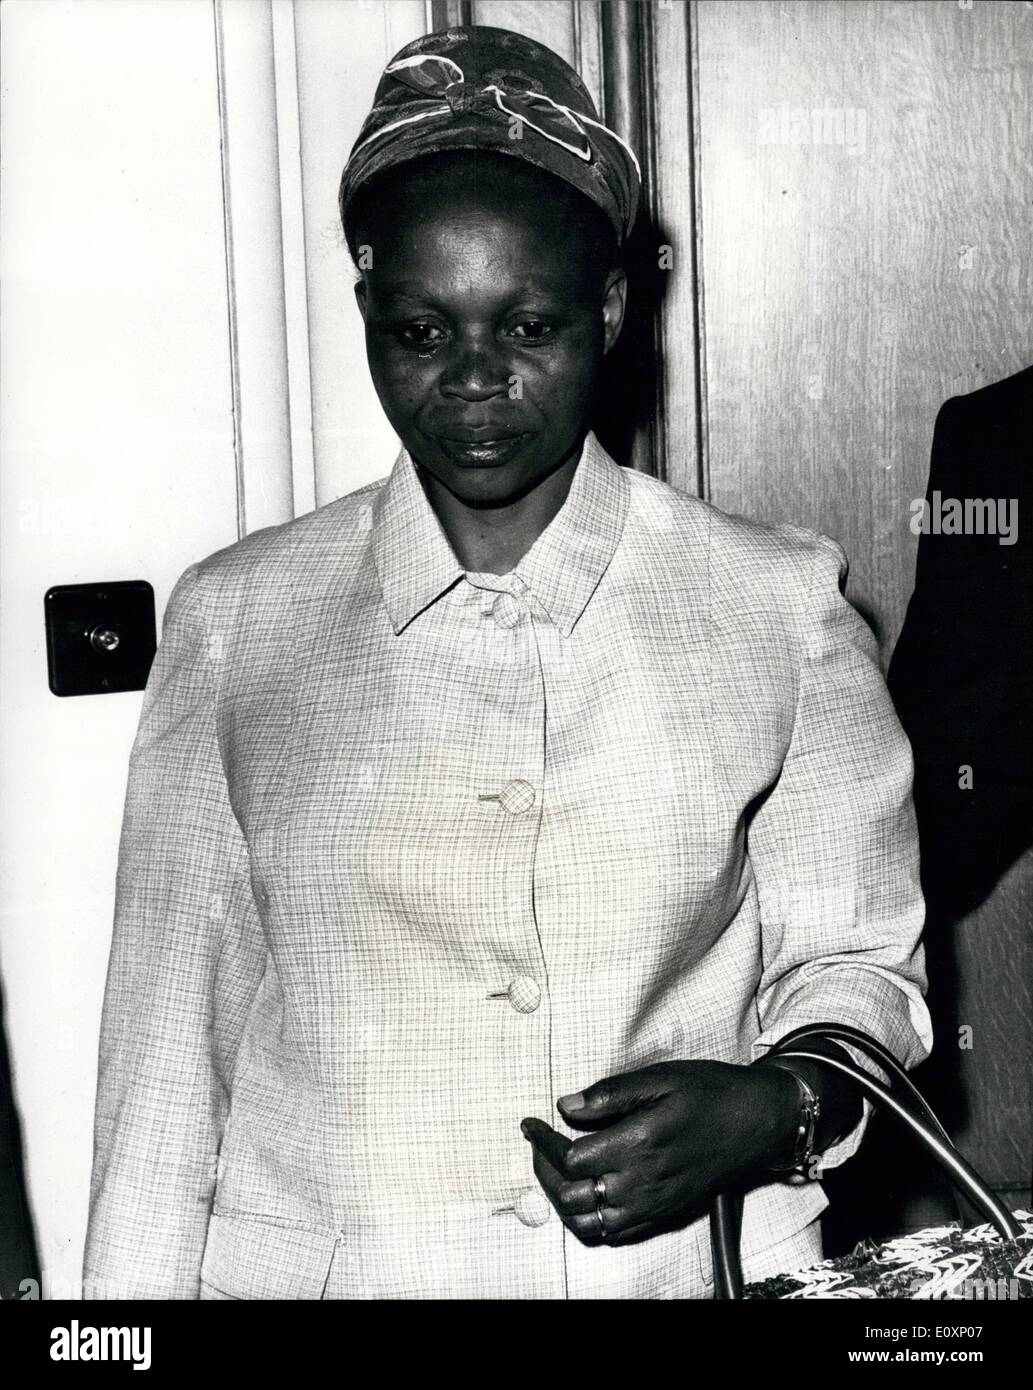 Jul. 05, 1967 - 5-7-67 Tshombe war in Congo. Mrs. Tshombe in Paris. Katanga province troops, loyal to former Premier Moise Tsohombe, have revolted against the government of President Joseph Mobutu and captured the town of Bukava, diplomatic reports said today. Tshombe was kidnapped at gunpoint last Saturday while flying to Ibiza from Majorea. His plane was diverted to Algiers and he has been held there since. Today, Mrs. Tshombe arrived in Paris today from Brussels, to confer with her husband's lawyer, M. Rene Floriot. Keystone Photo Shows: Mrs. Tshombe pictured in Paris today. Stock Photo